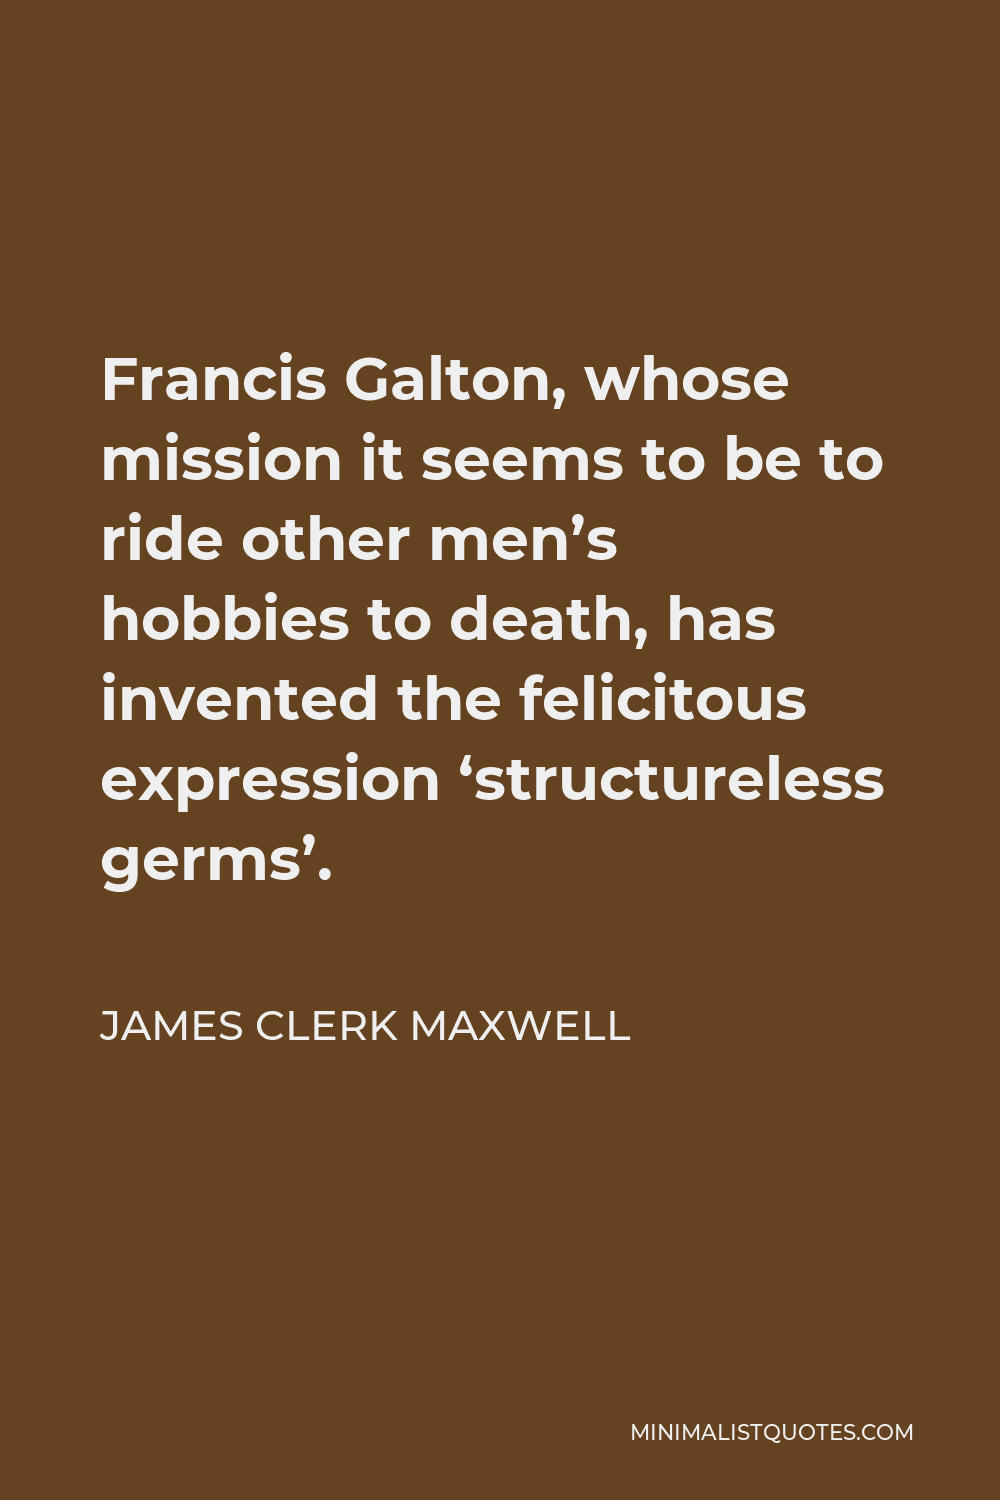 James Clerk Maxwell Quote - Francis Galton, whose mission it seems to be to ride other men’s hobbies to death, has invented the felicitous expression ‘structureless germs’.